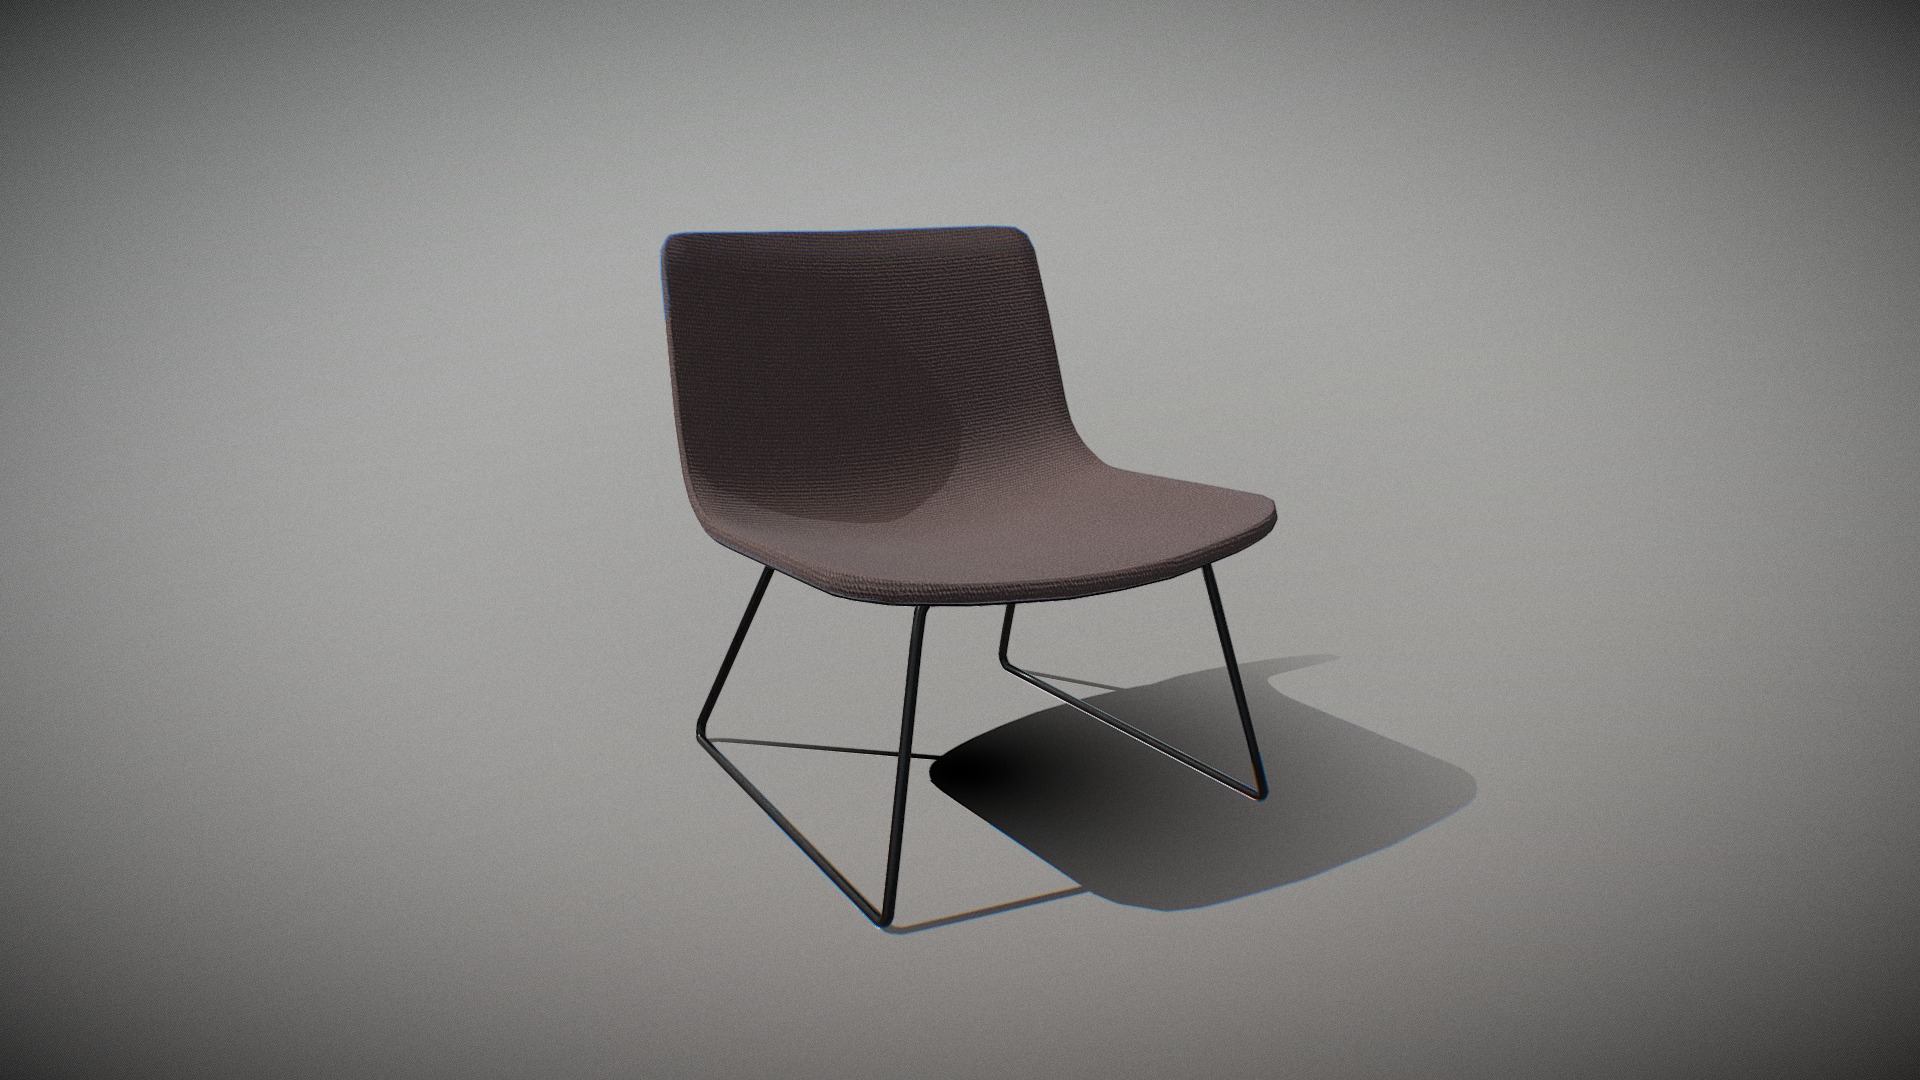 3D model PATO LOUNGE SLEDGE-fabric brown - This is a 3D model of the PATO LOUNGE SLEDGE-fabric brown. The 3D model is about a chair on a white background.